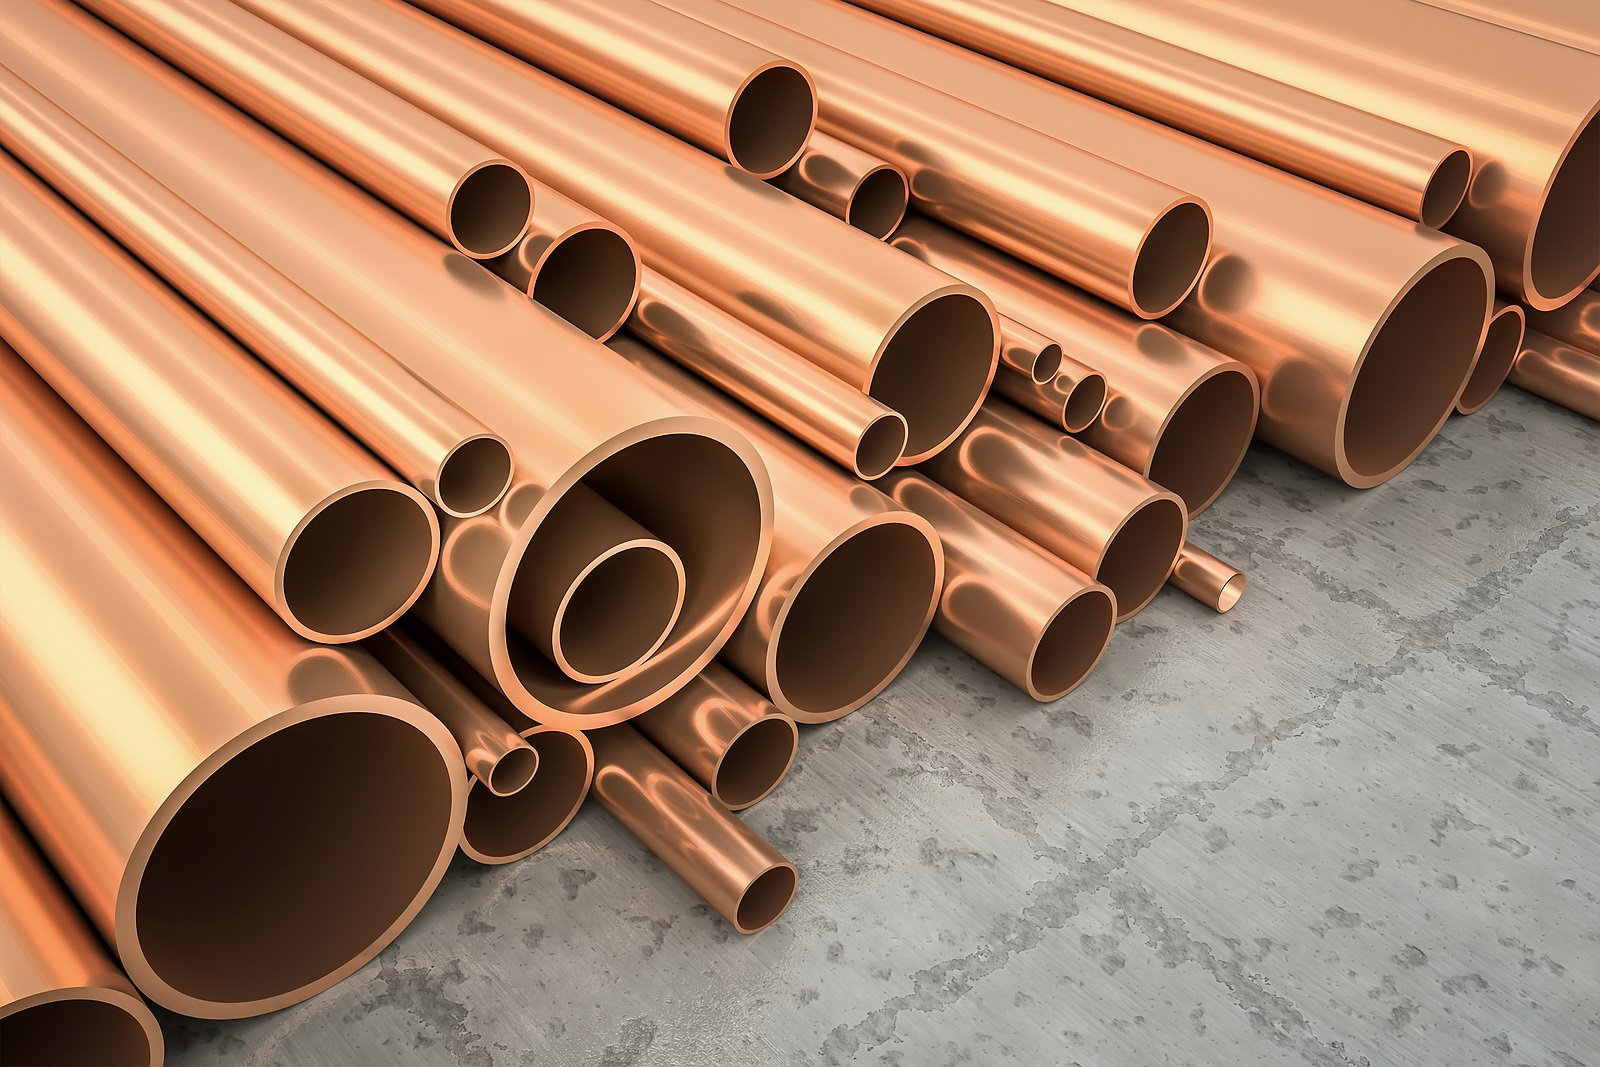 An image of some nice copper pipes in a warehouse